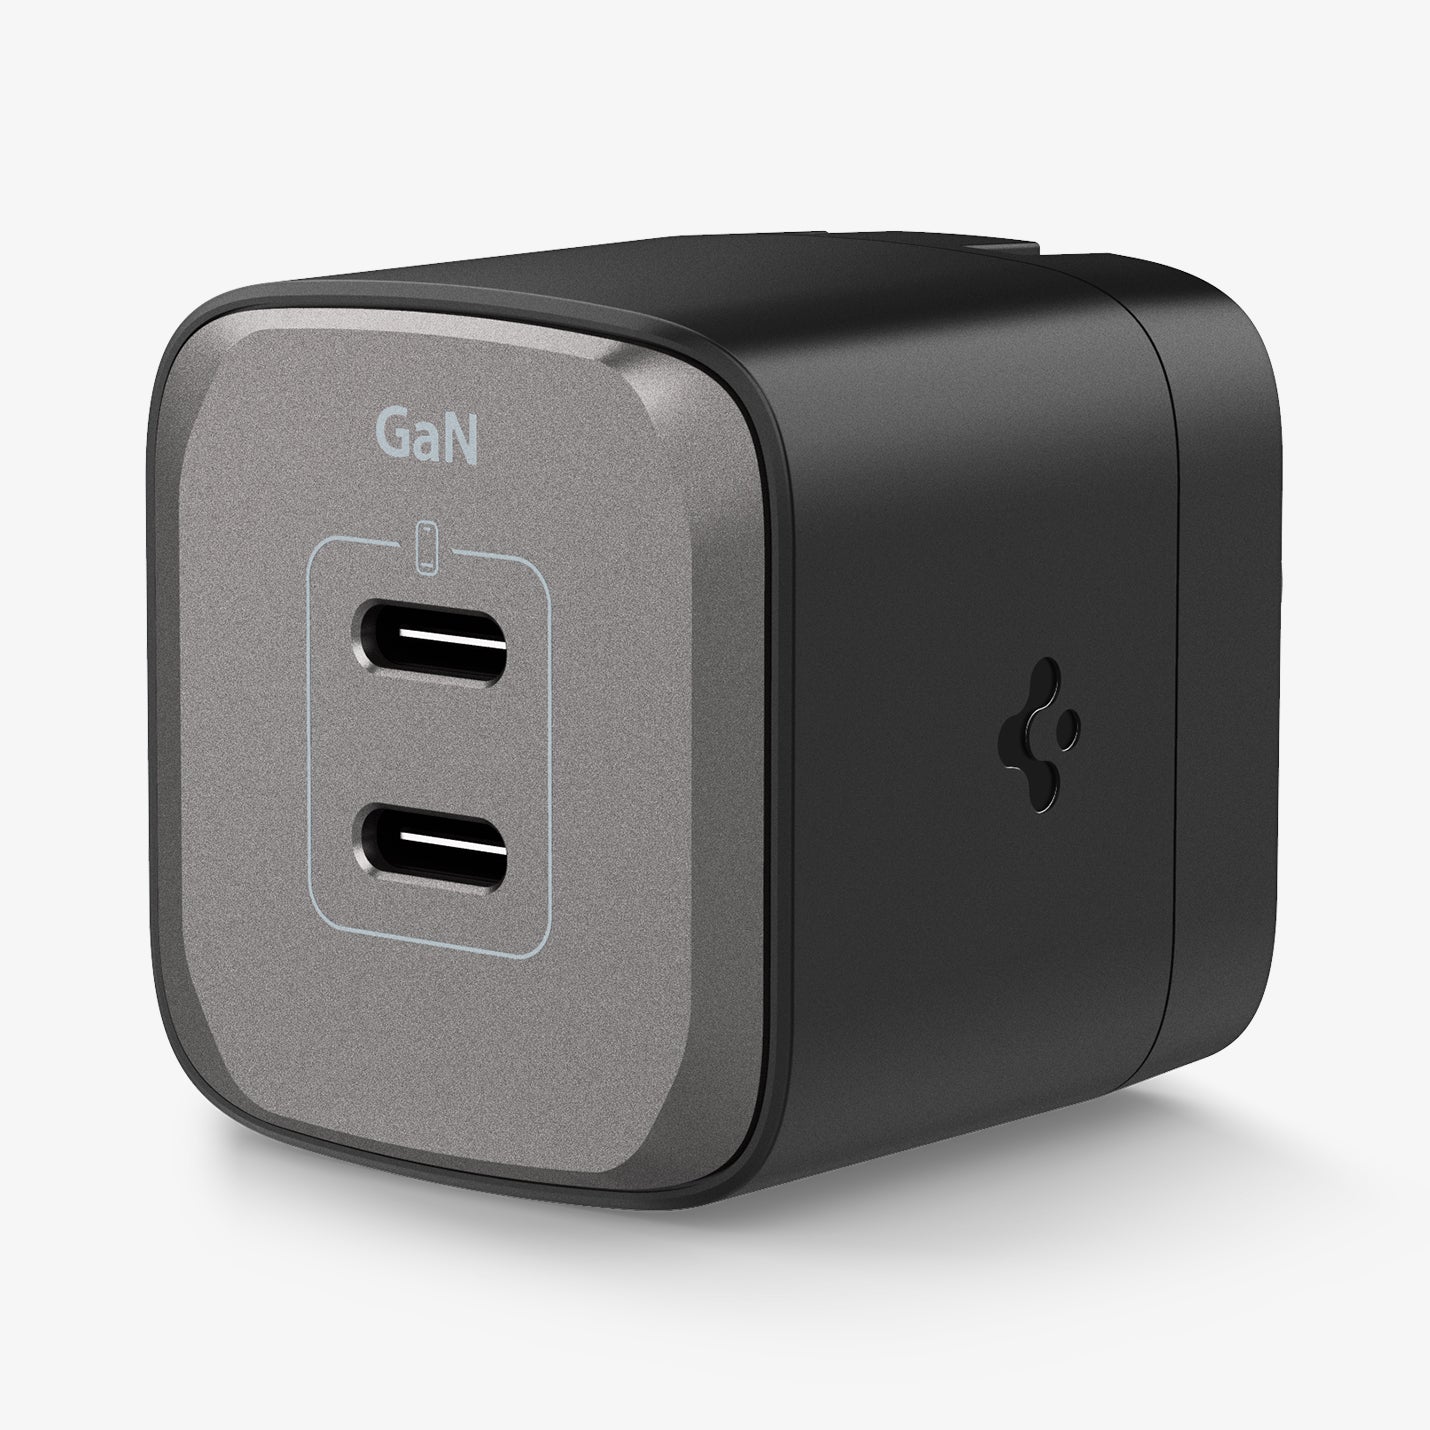 ACH05142 - ArcStation™ Pro GaN 352 Dual USB-C Wall Charger PE2202 in Midnight Black showing the front and sides